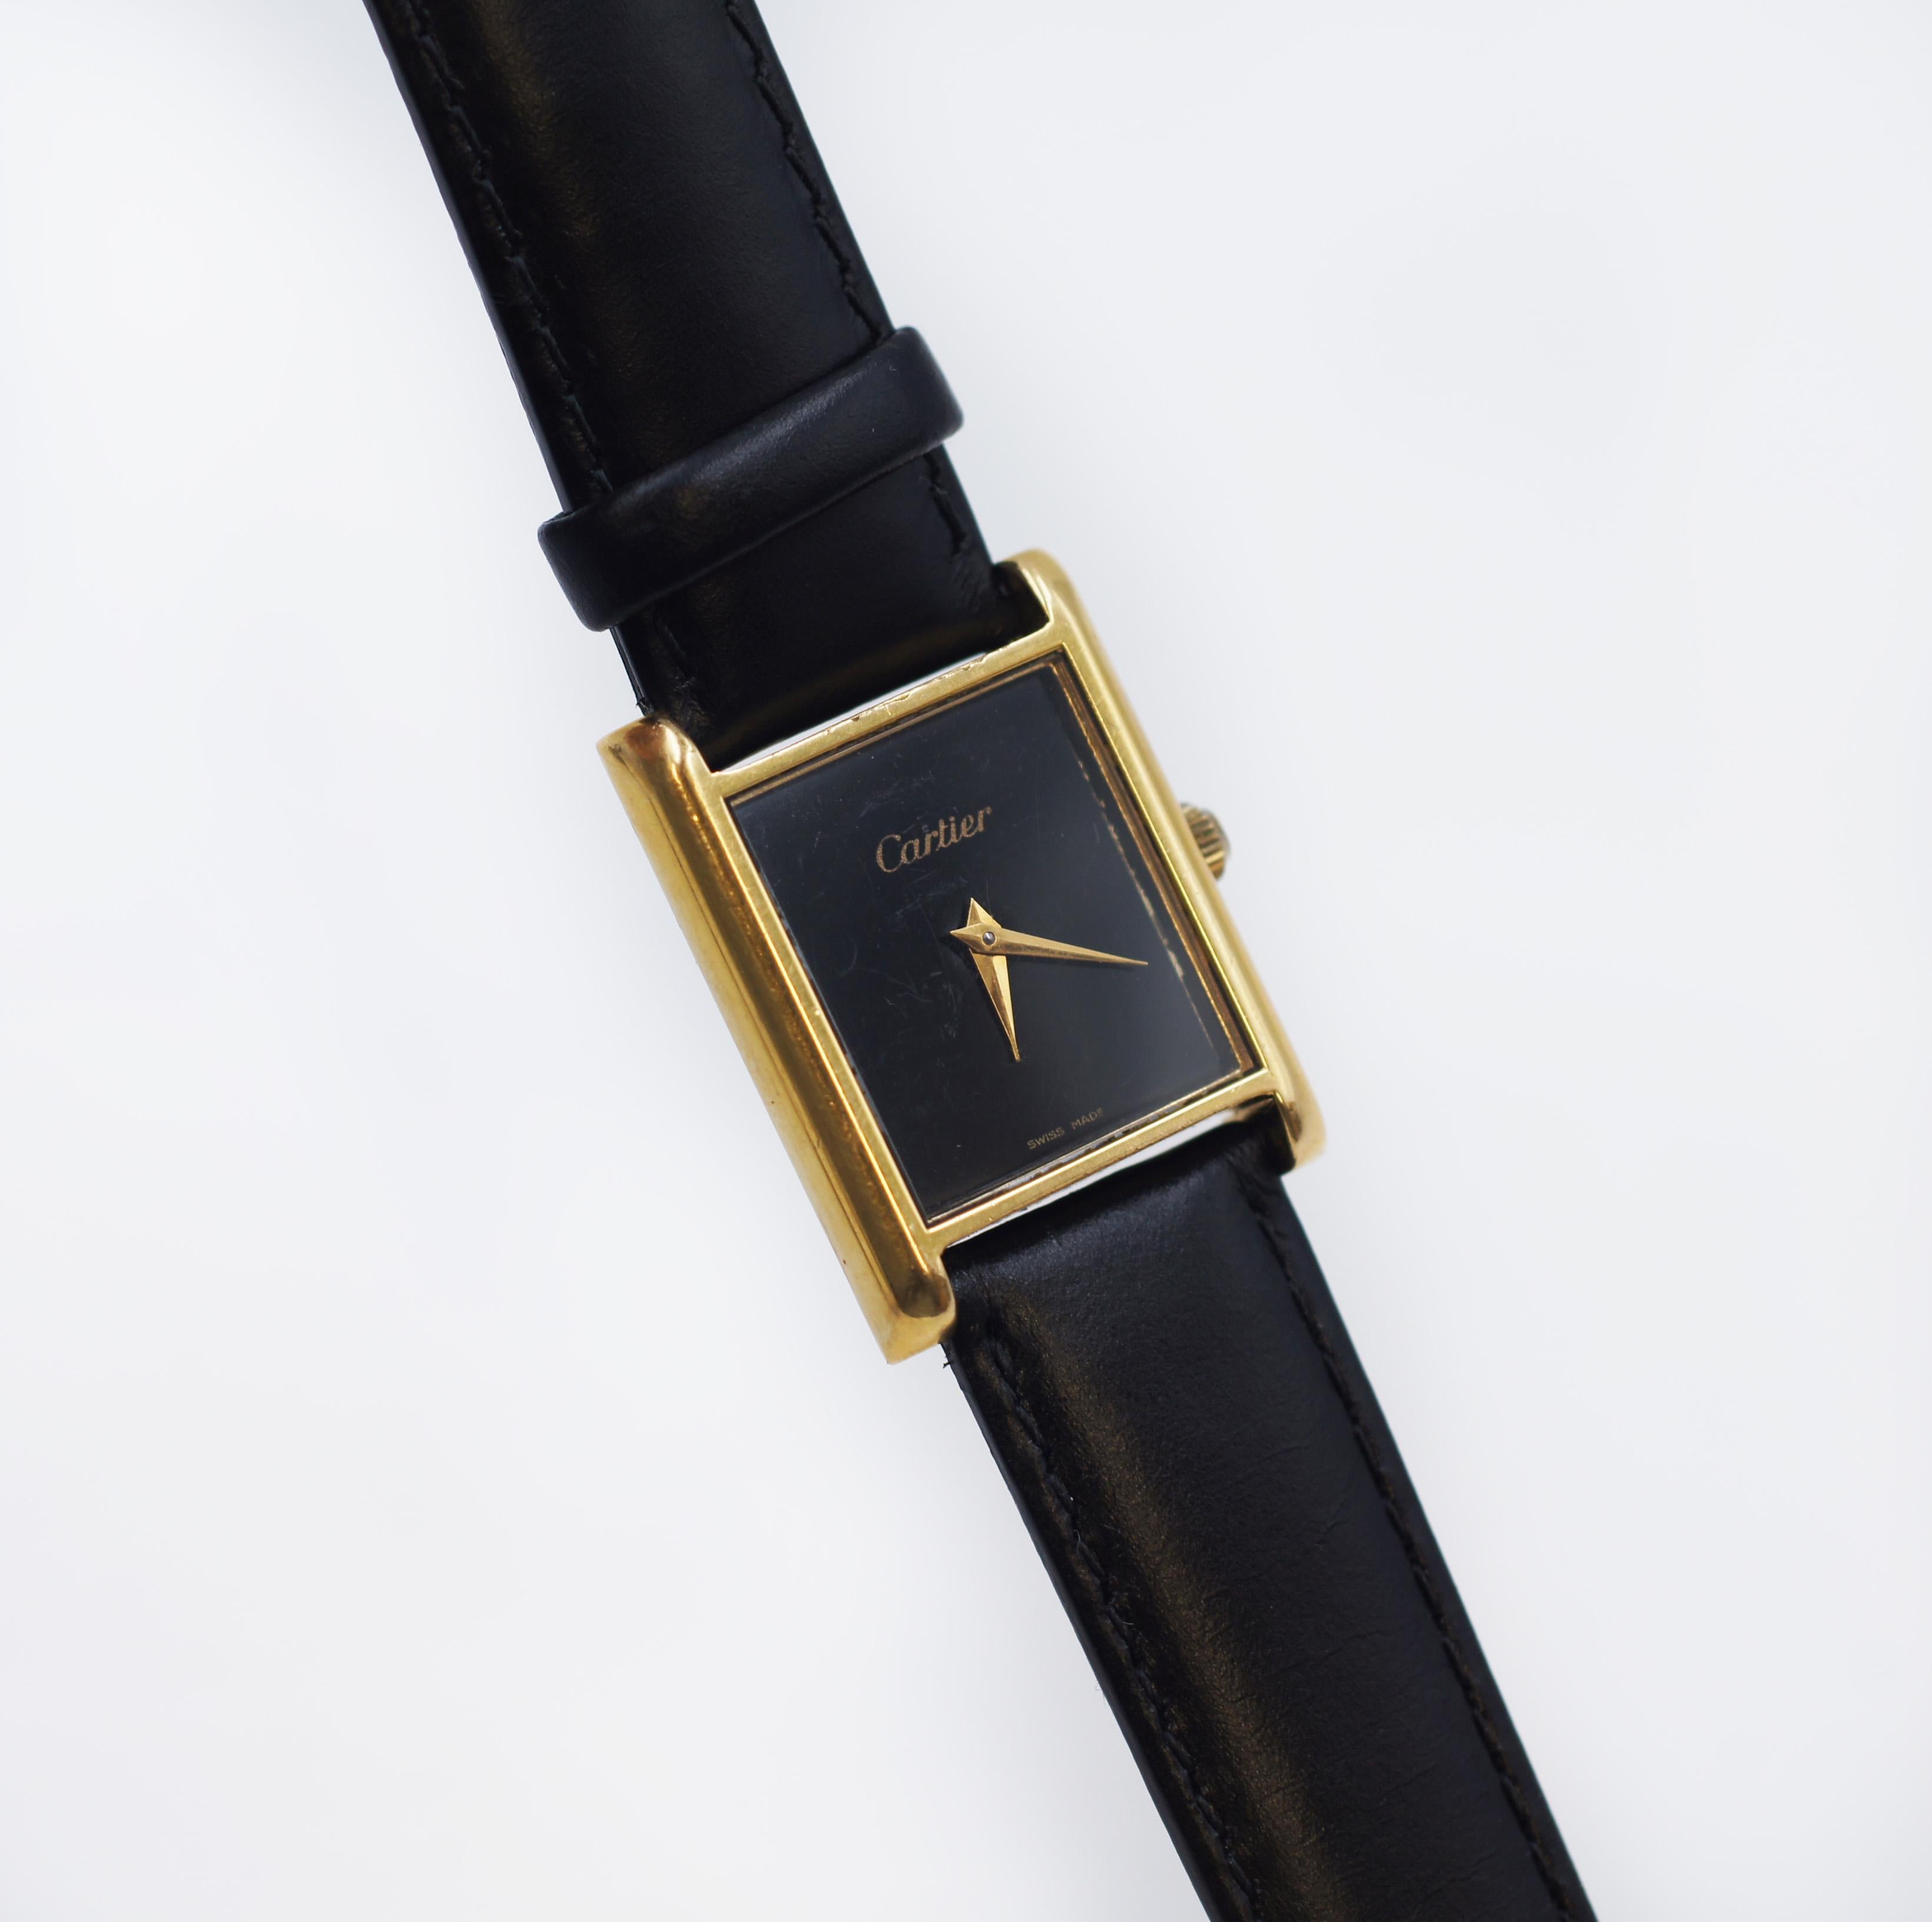 Cartier Vintage 18K Gold Electroplated Tank Watch 1